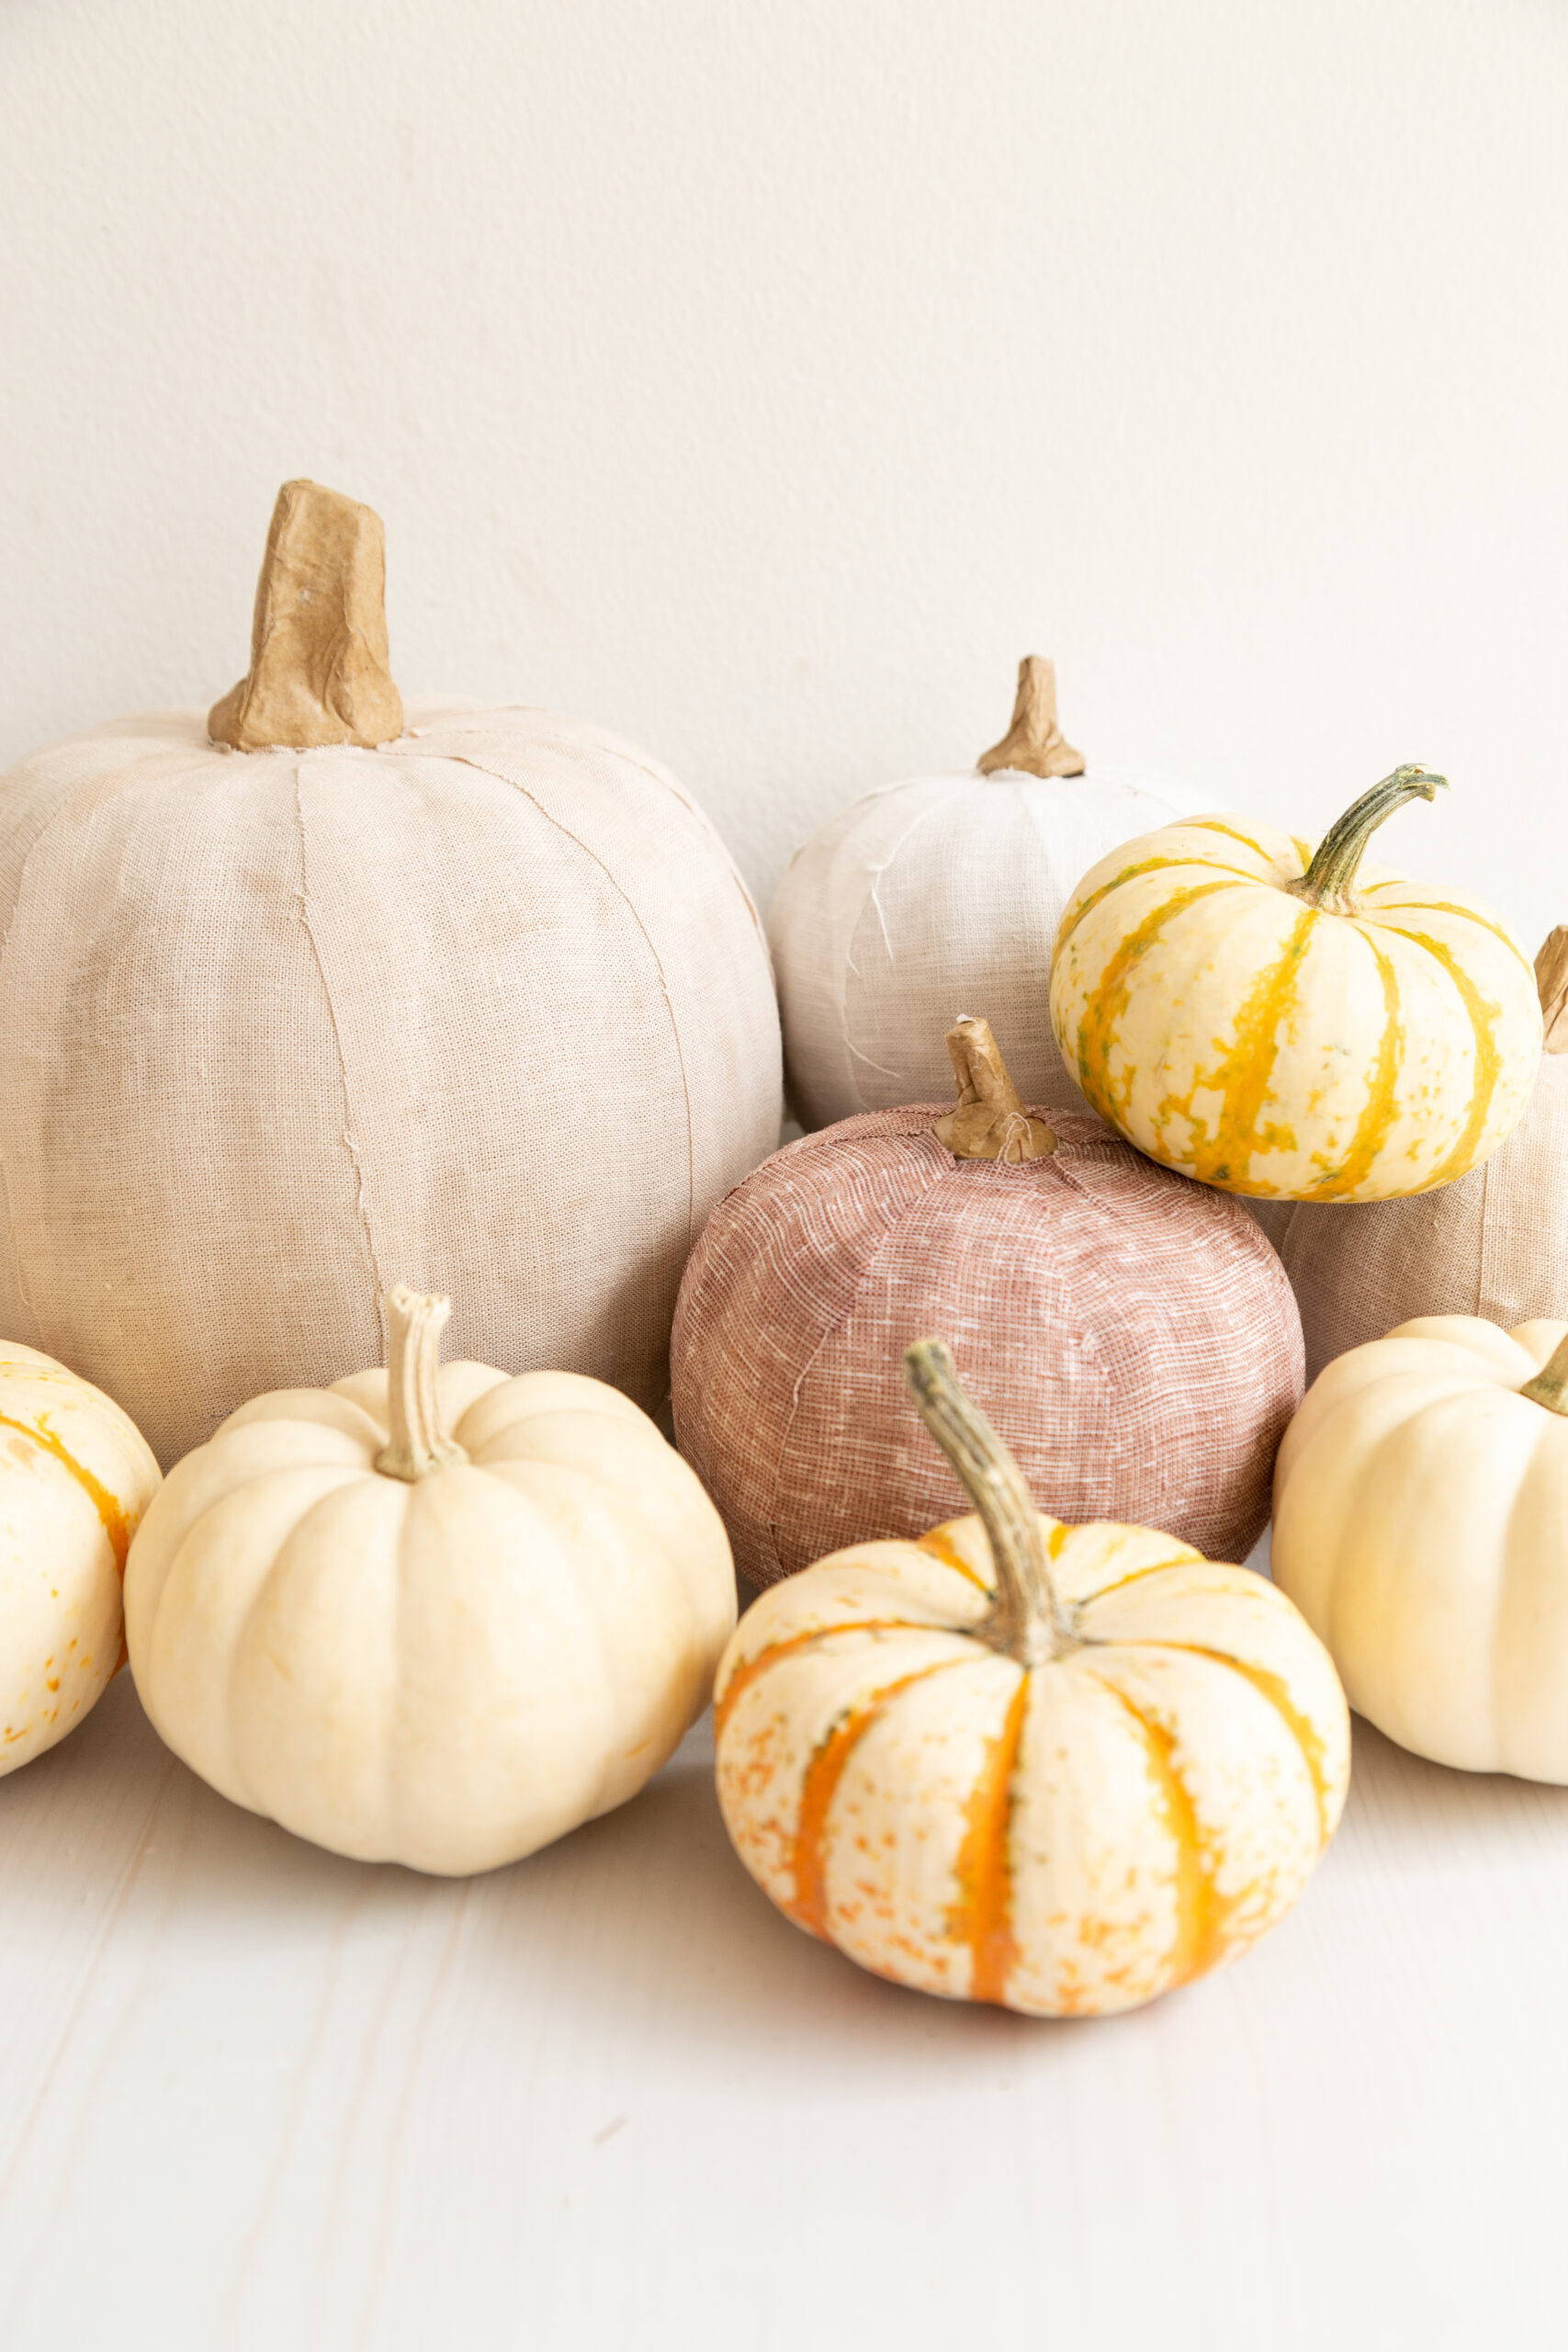 Fabric covered pumpkins